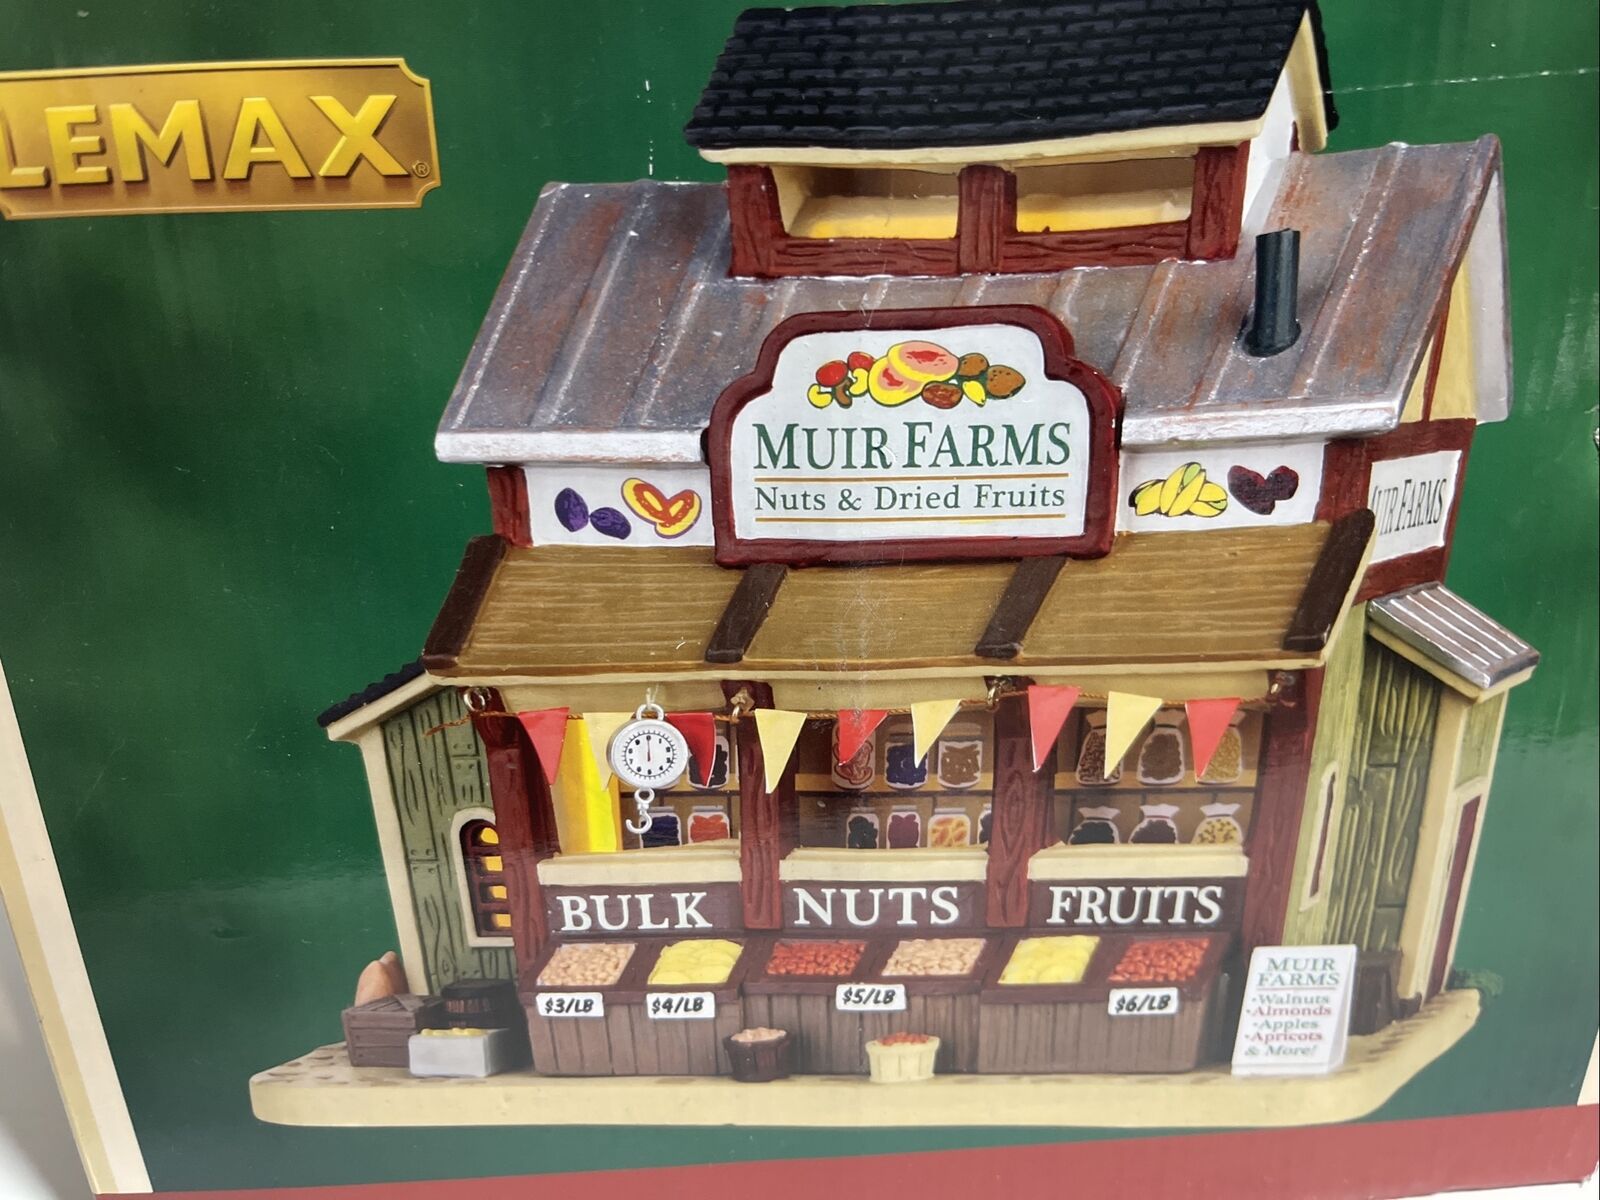 Lemax Holiday Village 2016 MUIR FARMS NUTS & FRIED FRUITS Lighted Building NEW